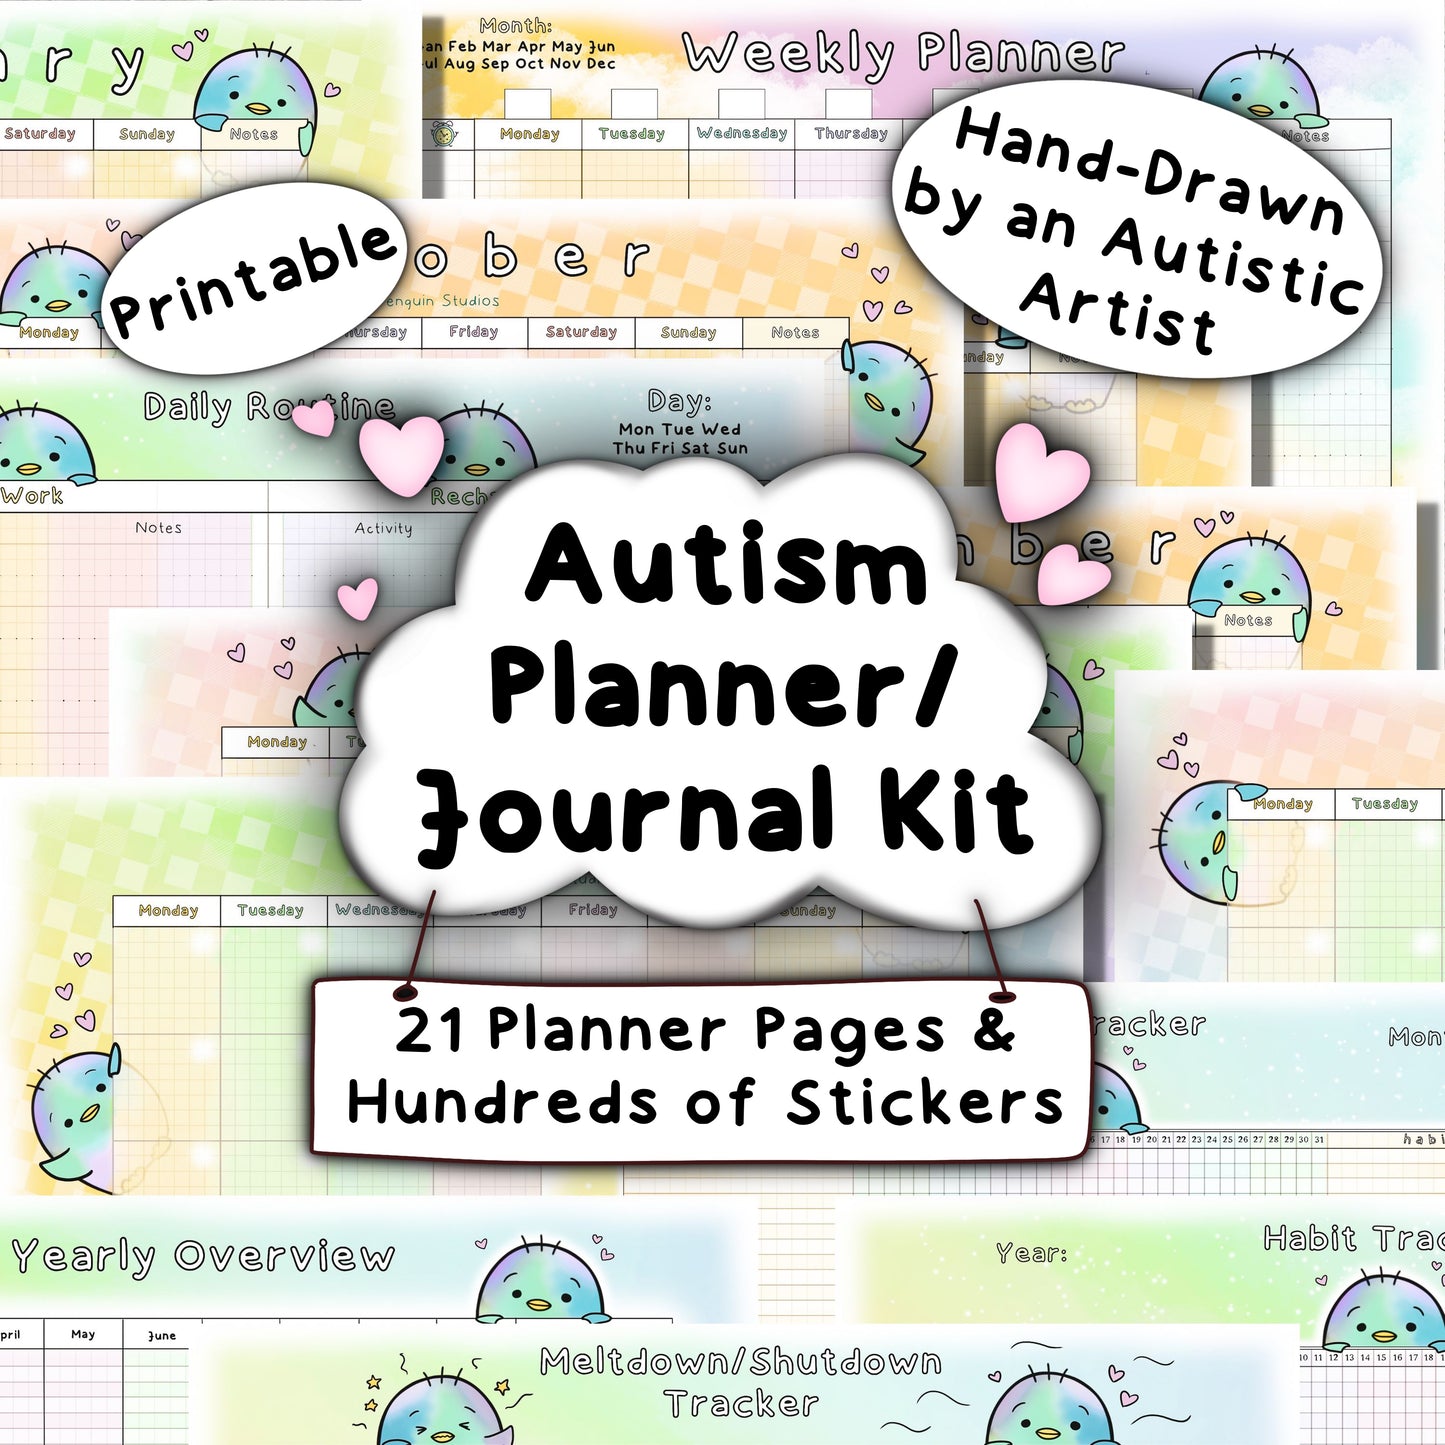 Printable Autism Planner Kit. Written and hand-drawn by an autistic artist (LiL Penguin Studios (autism_happy_plance on Instagram)